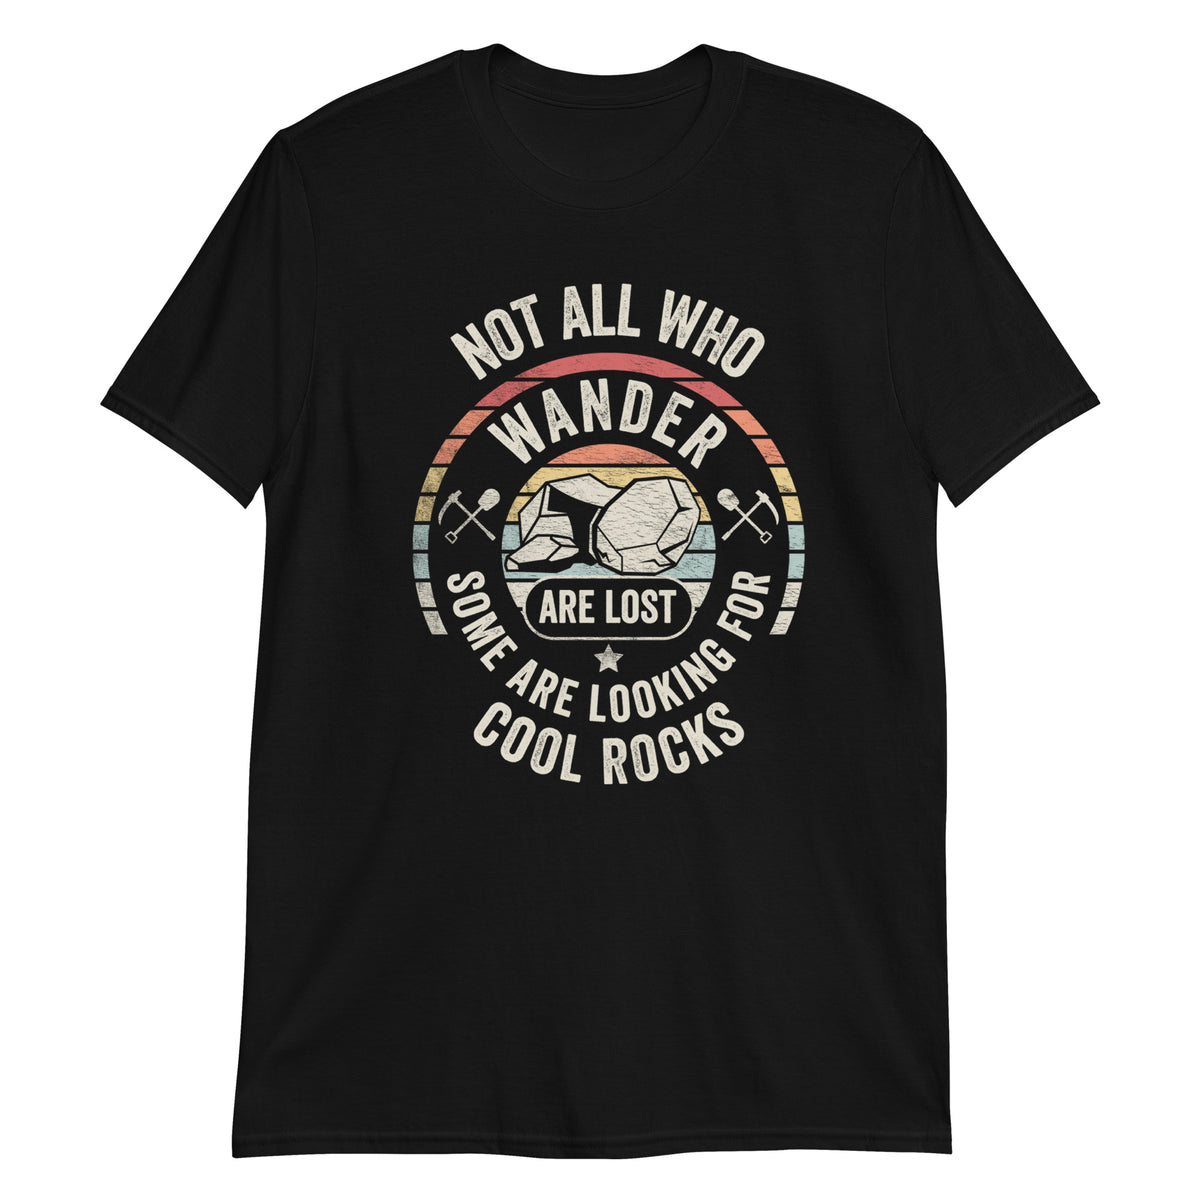 Not All Who Wander are Lost Some are Looking for Cool Rocks T-Shirt